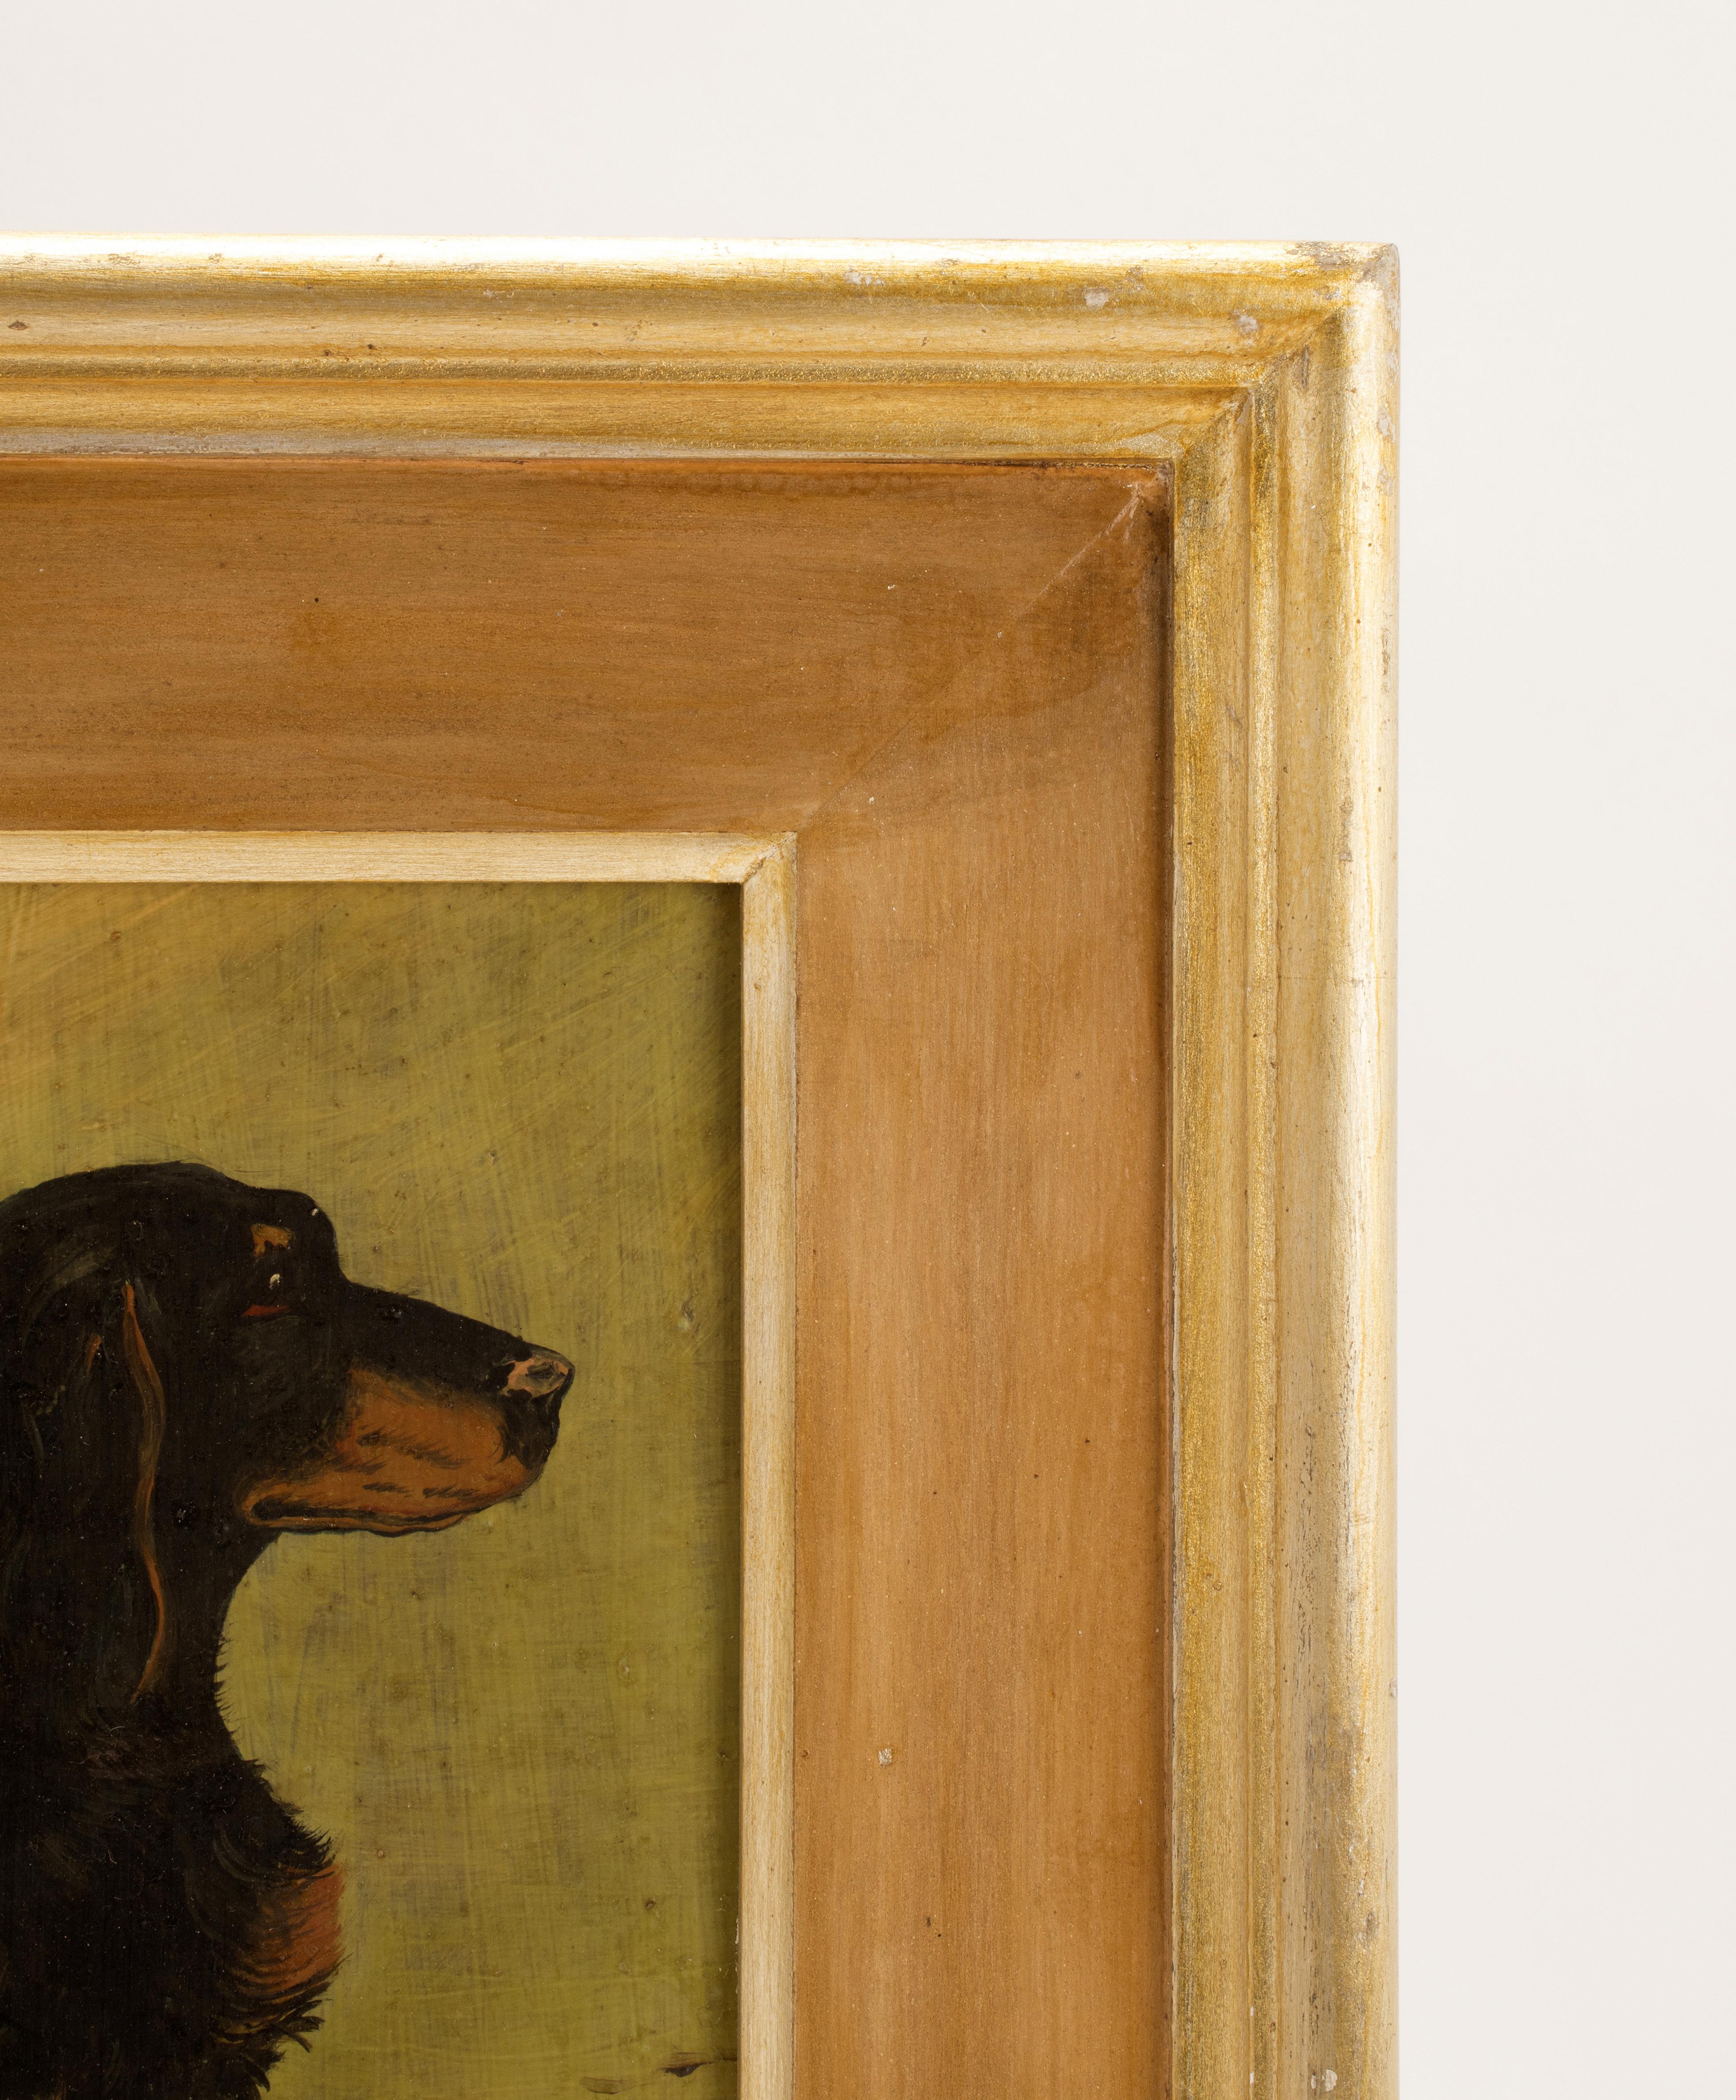 British Painting Oil on Wood Depicting a Dachshund Dog, England, 1920